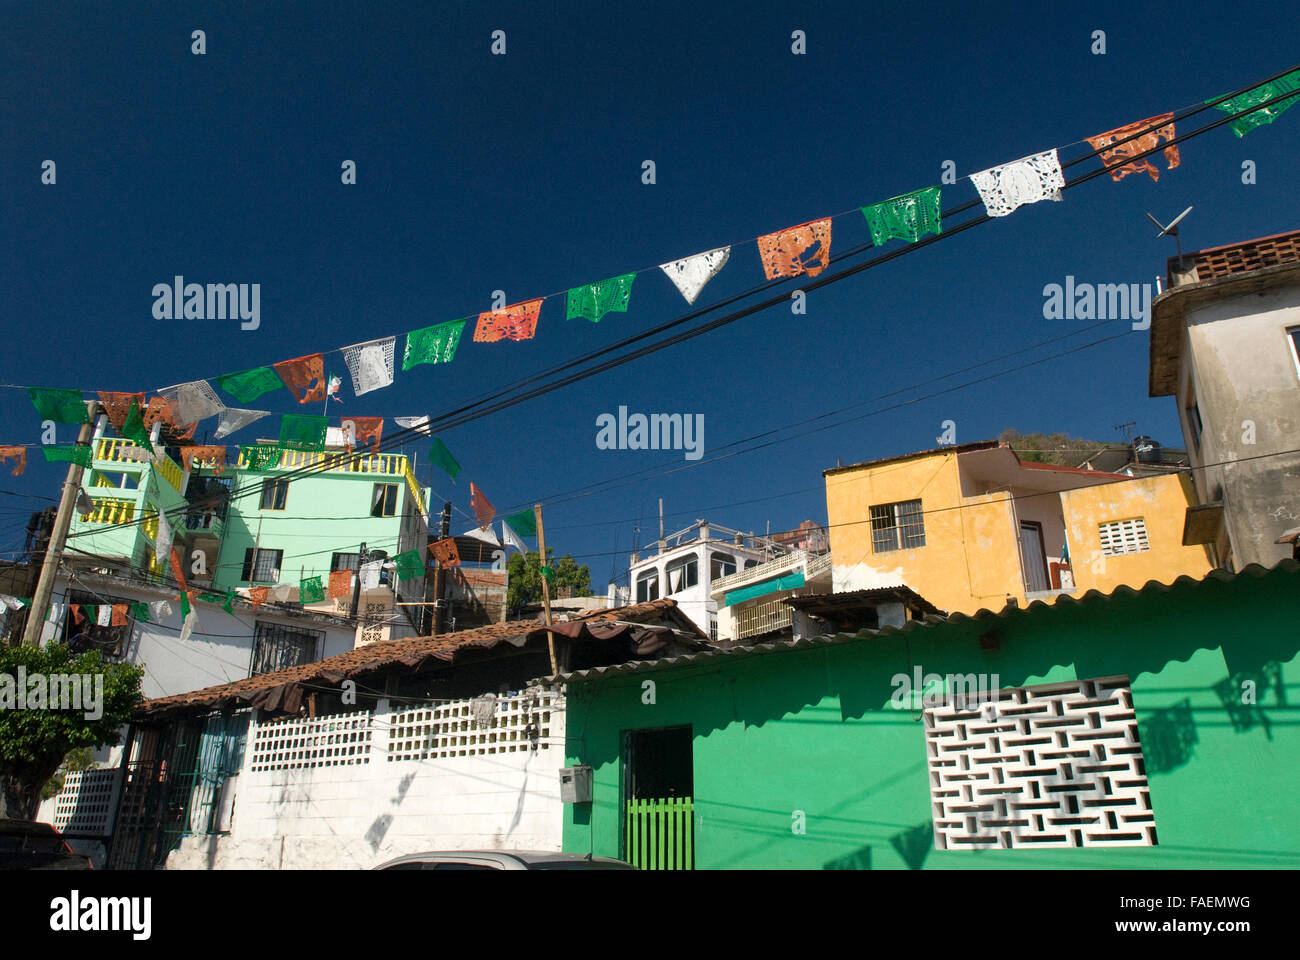 Colorful flags and banners above streets of Acapulco, Mexico Stock Photo